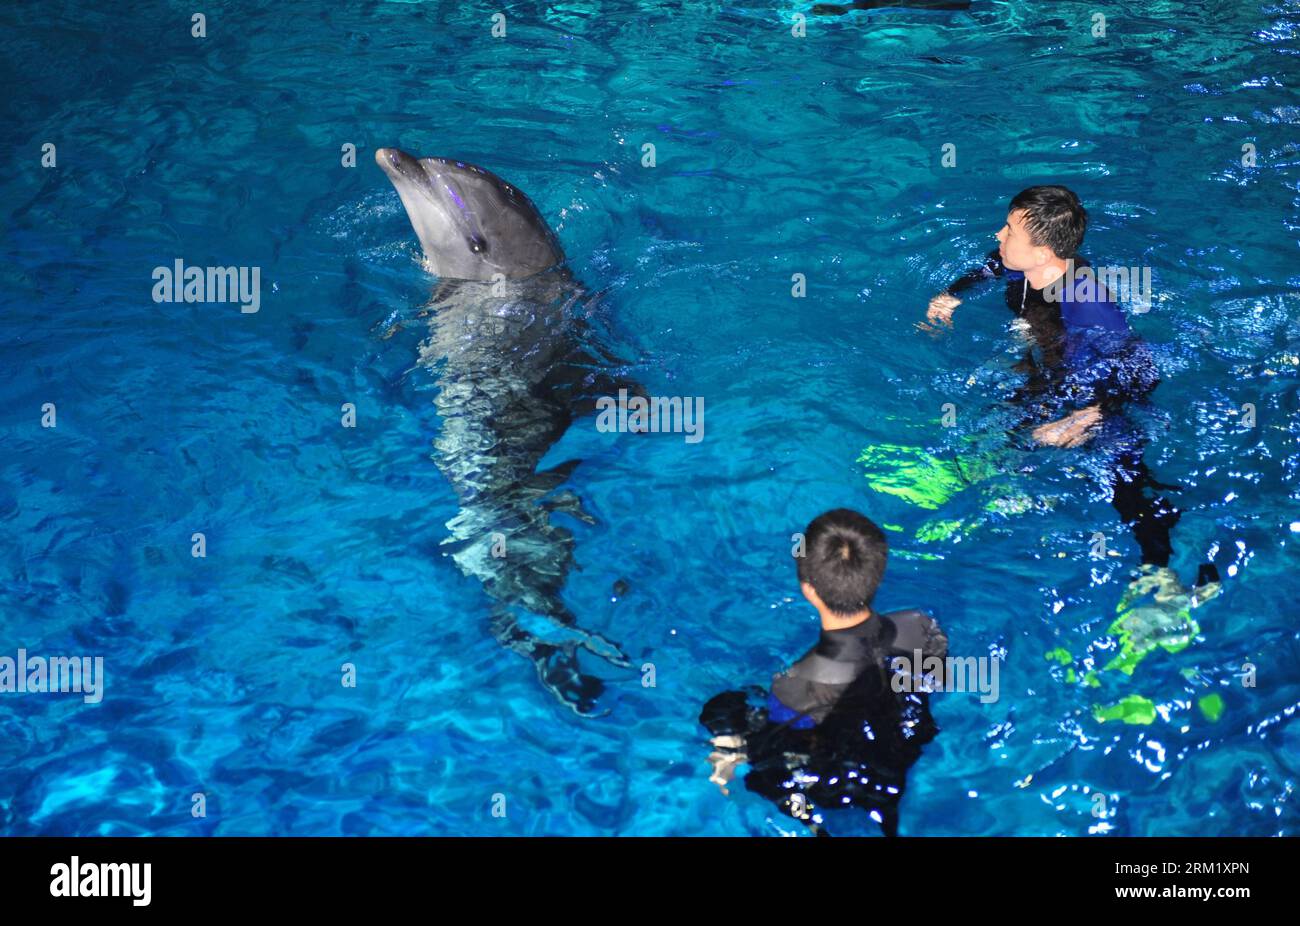 Bildnummer: 59647291  Datum: 15.05.2013  Copyright: imago/Xinhua (130515) -- YANTAI, May 15, 2013 (Xinhua) -- Workers help the arrived dolphins adapt the new environment in a breeding pool of the Ocean Aquarium of Penglai in Penglai City, east China s Shandong Province, May 15, 2013. Ten dolphins, arriving in Yantai of Shandong Province from Osaka of Japan on May 14, with an average age of 2 to 3 and an average weight of 200 to 700 kilograms, are about 3 meters in length and will see the public after 1 to 3 months of adaptation. (Xinhua/Chu Yang) (zwx) CHINA-SHANDONG-PENGLAI-DOLPHINS FROM JAPA Stock Photo